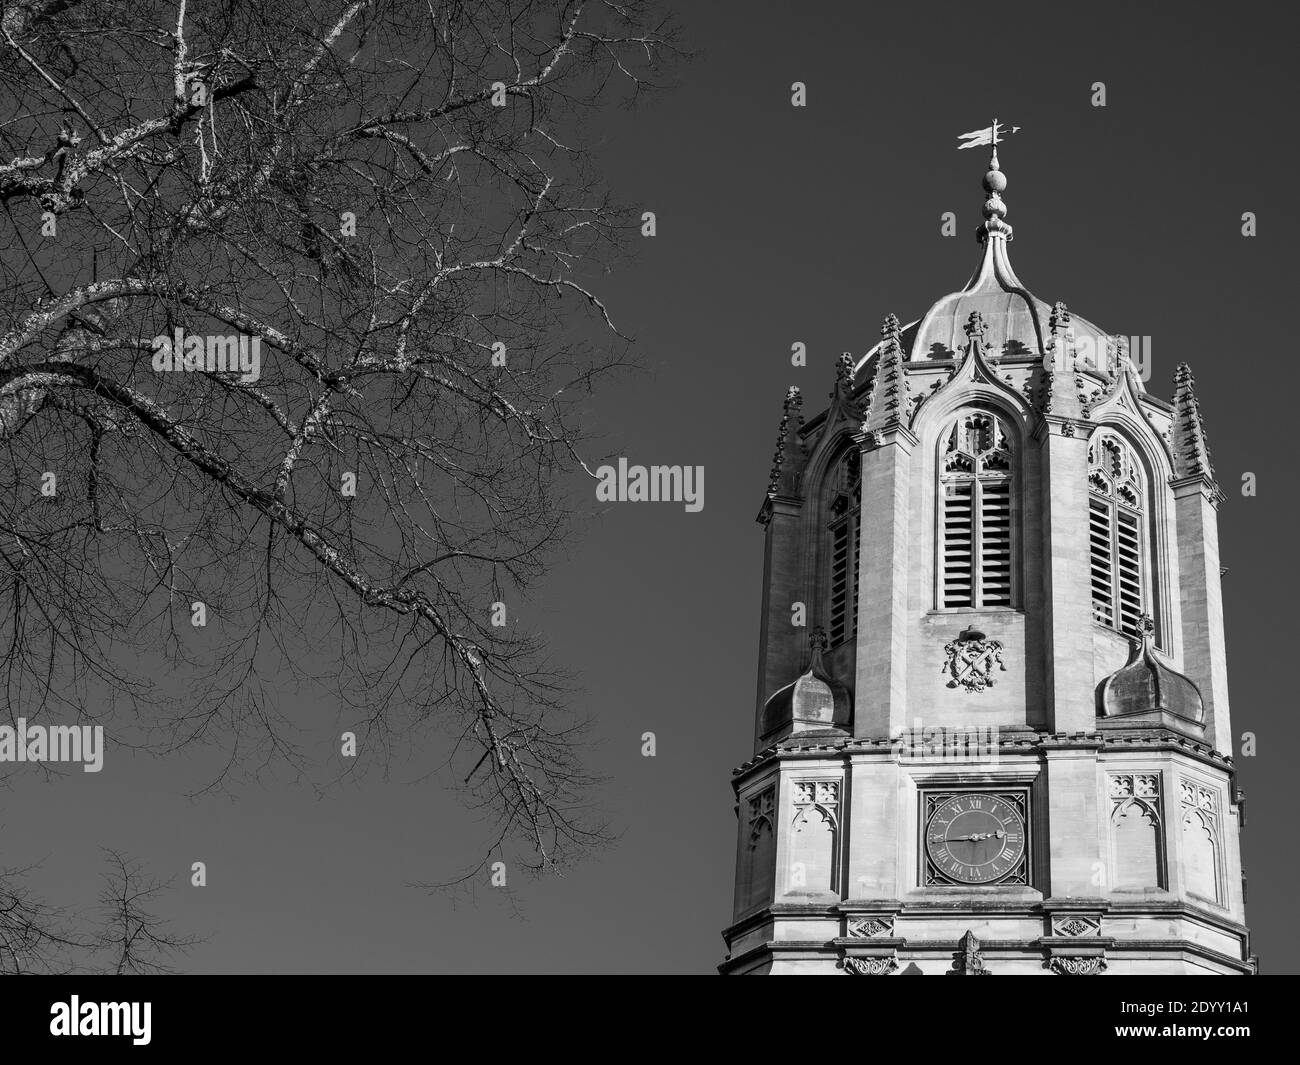 Black and White Landscape of Tom Tower In Winter, Christ Church College, University of Oxford, Oxfordshire, England, UK, GB. Stock Photo